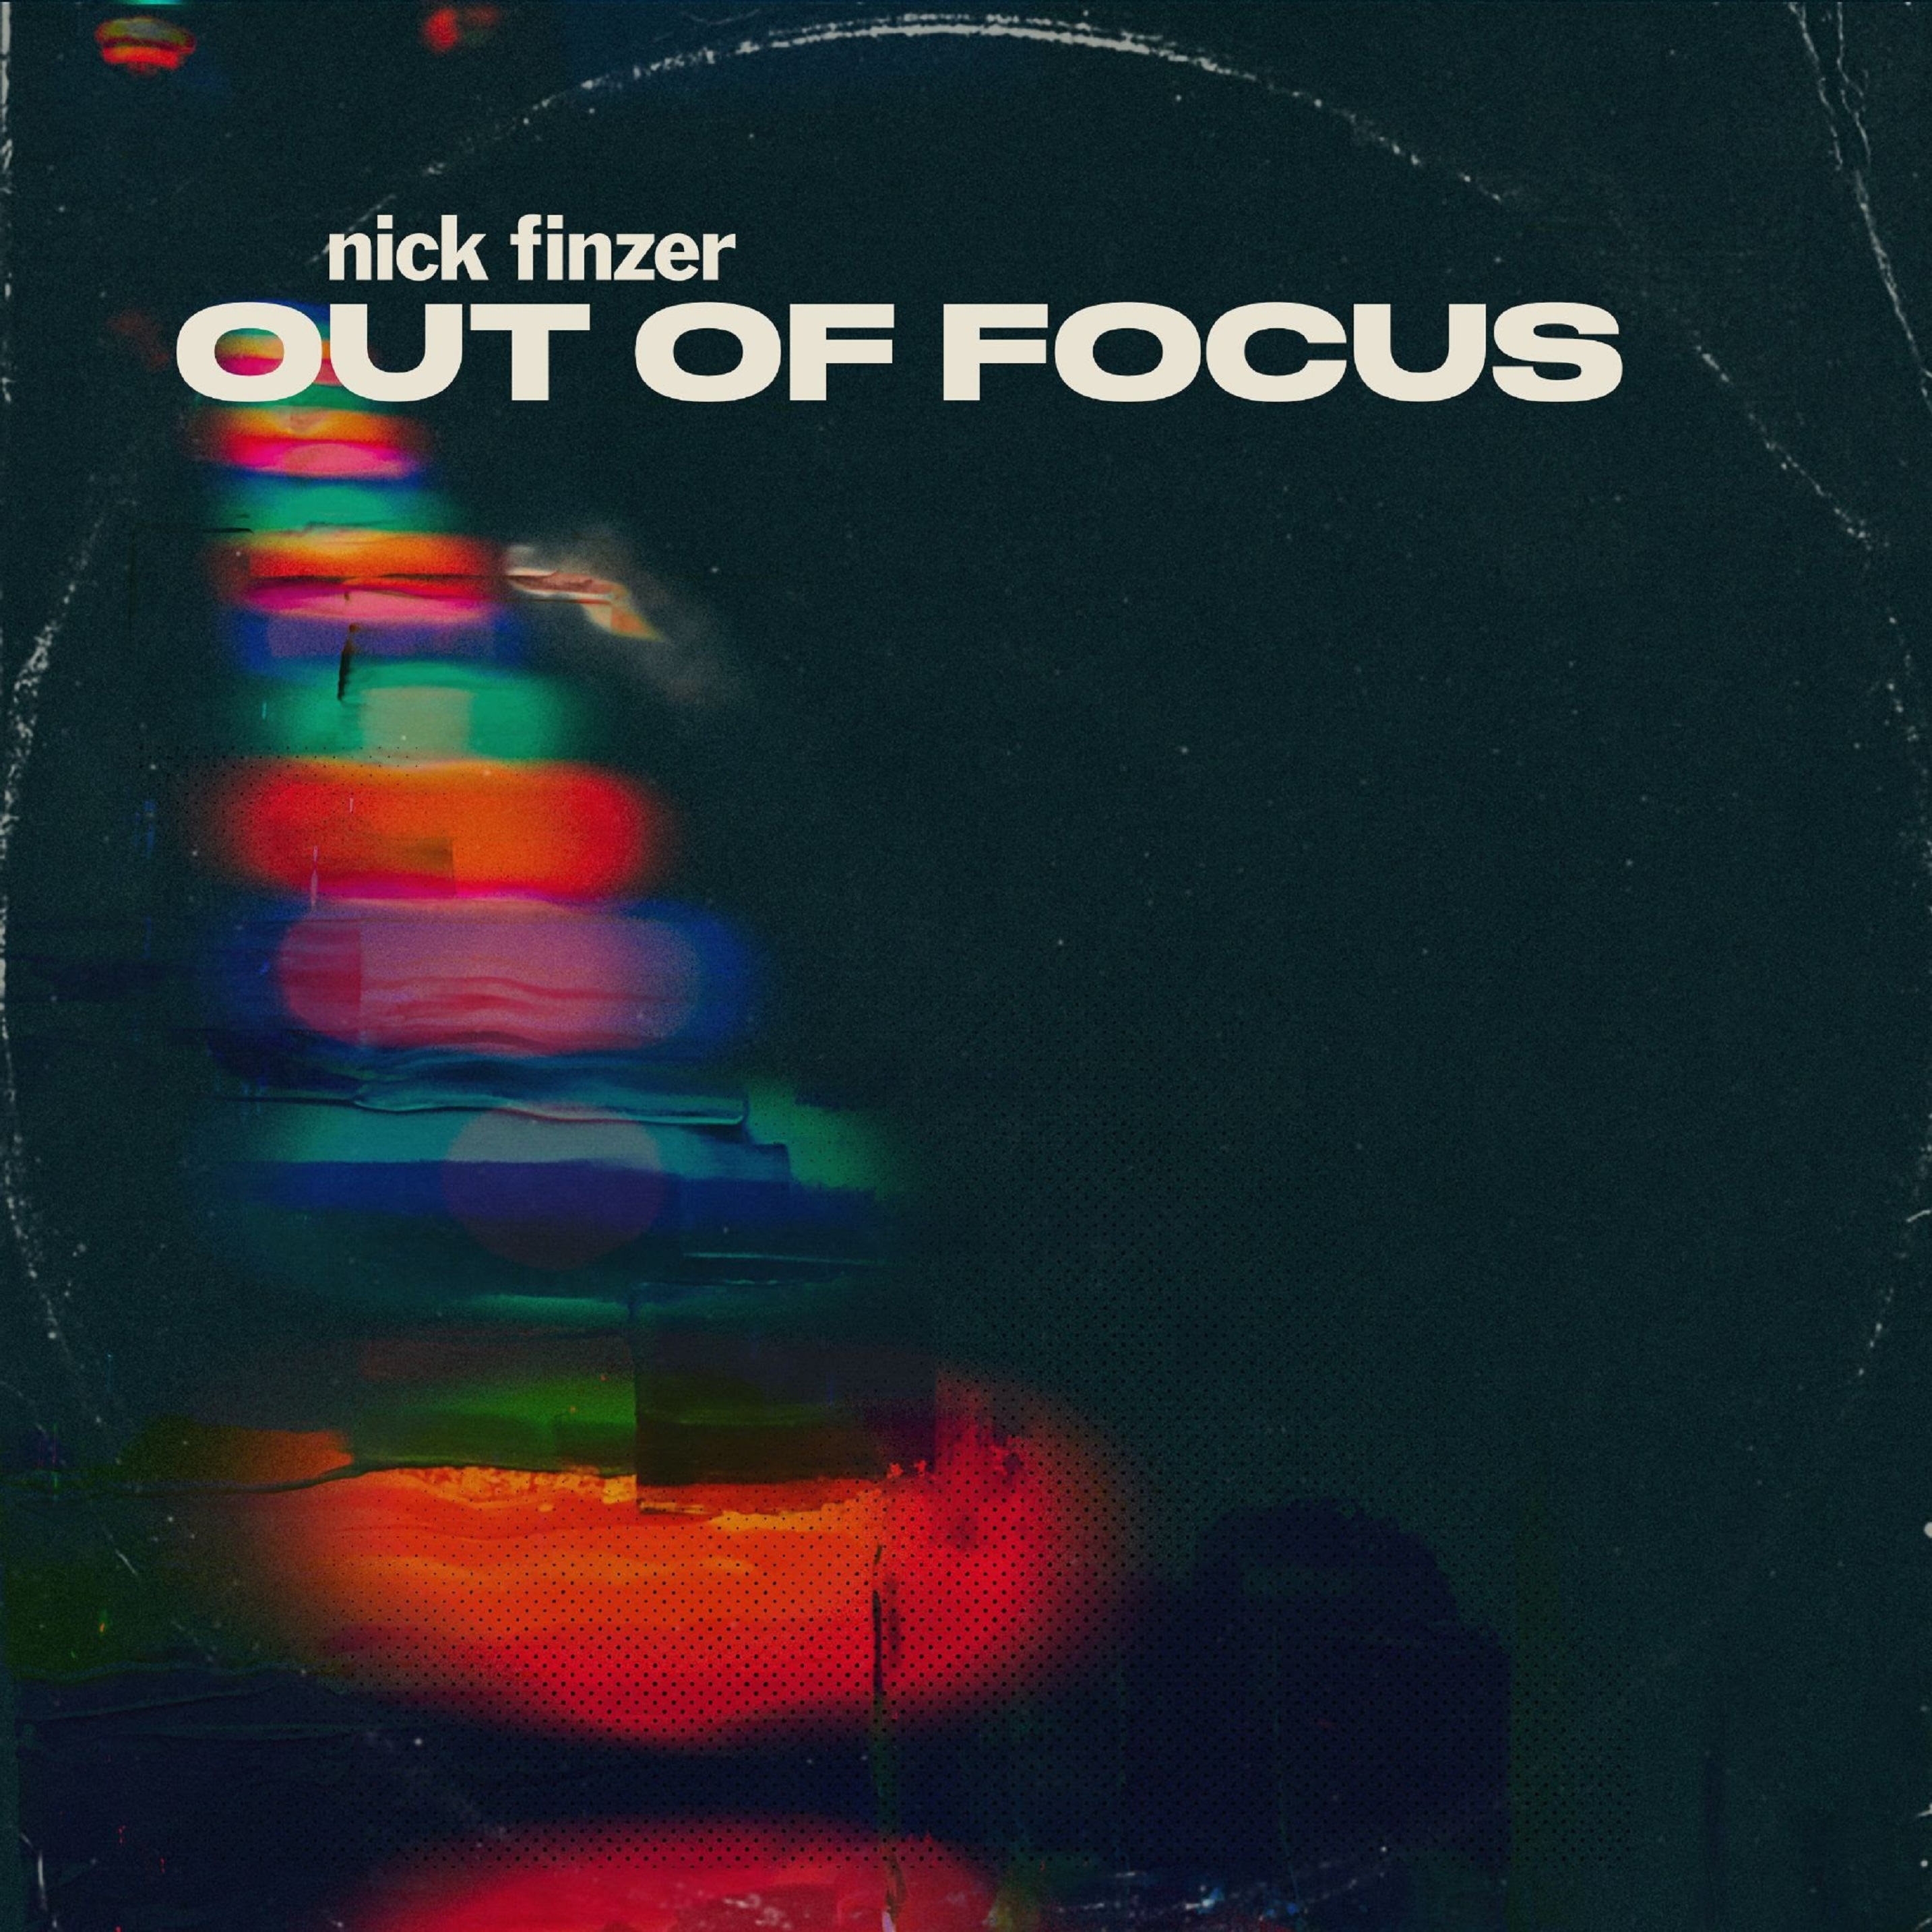 Nick Finzer set to release "Out of Focus"